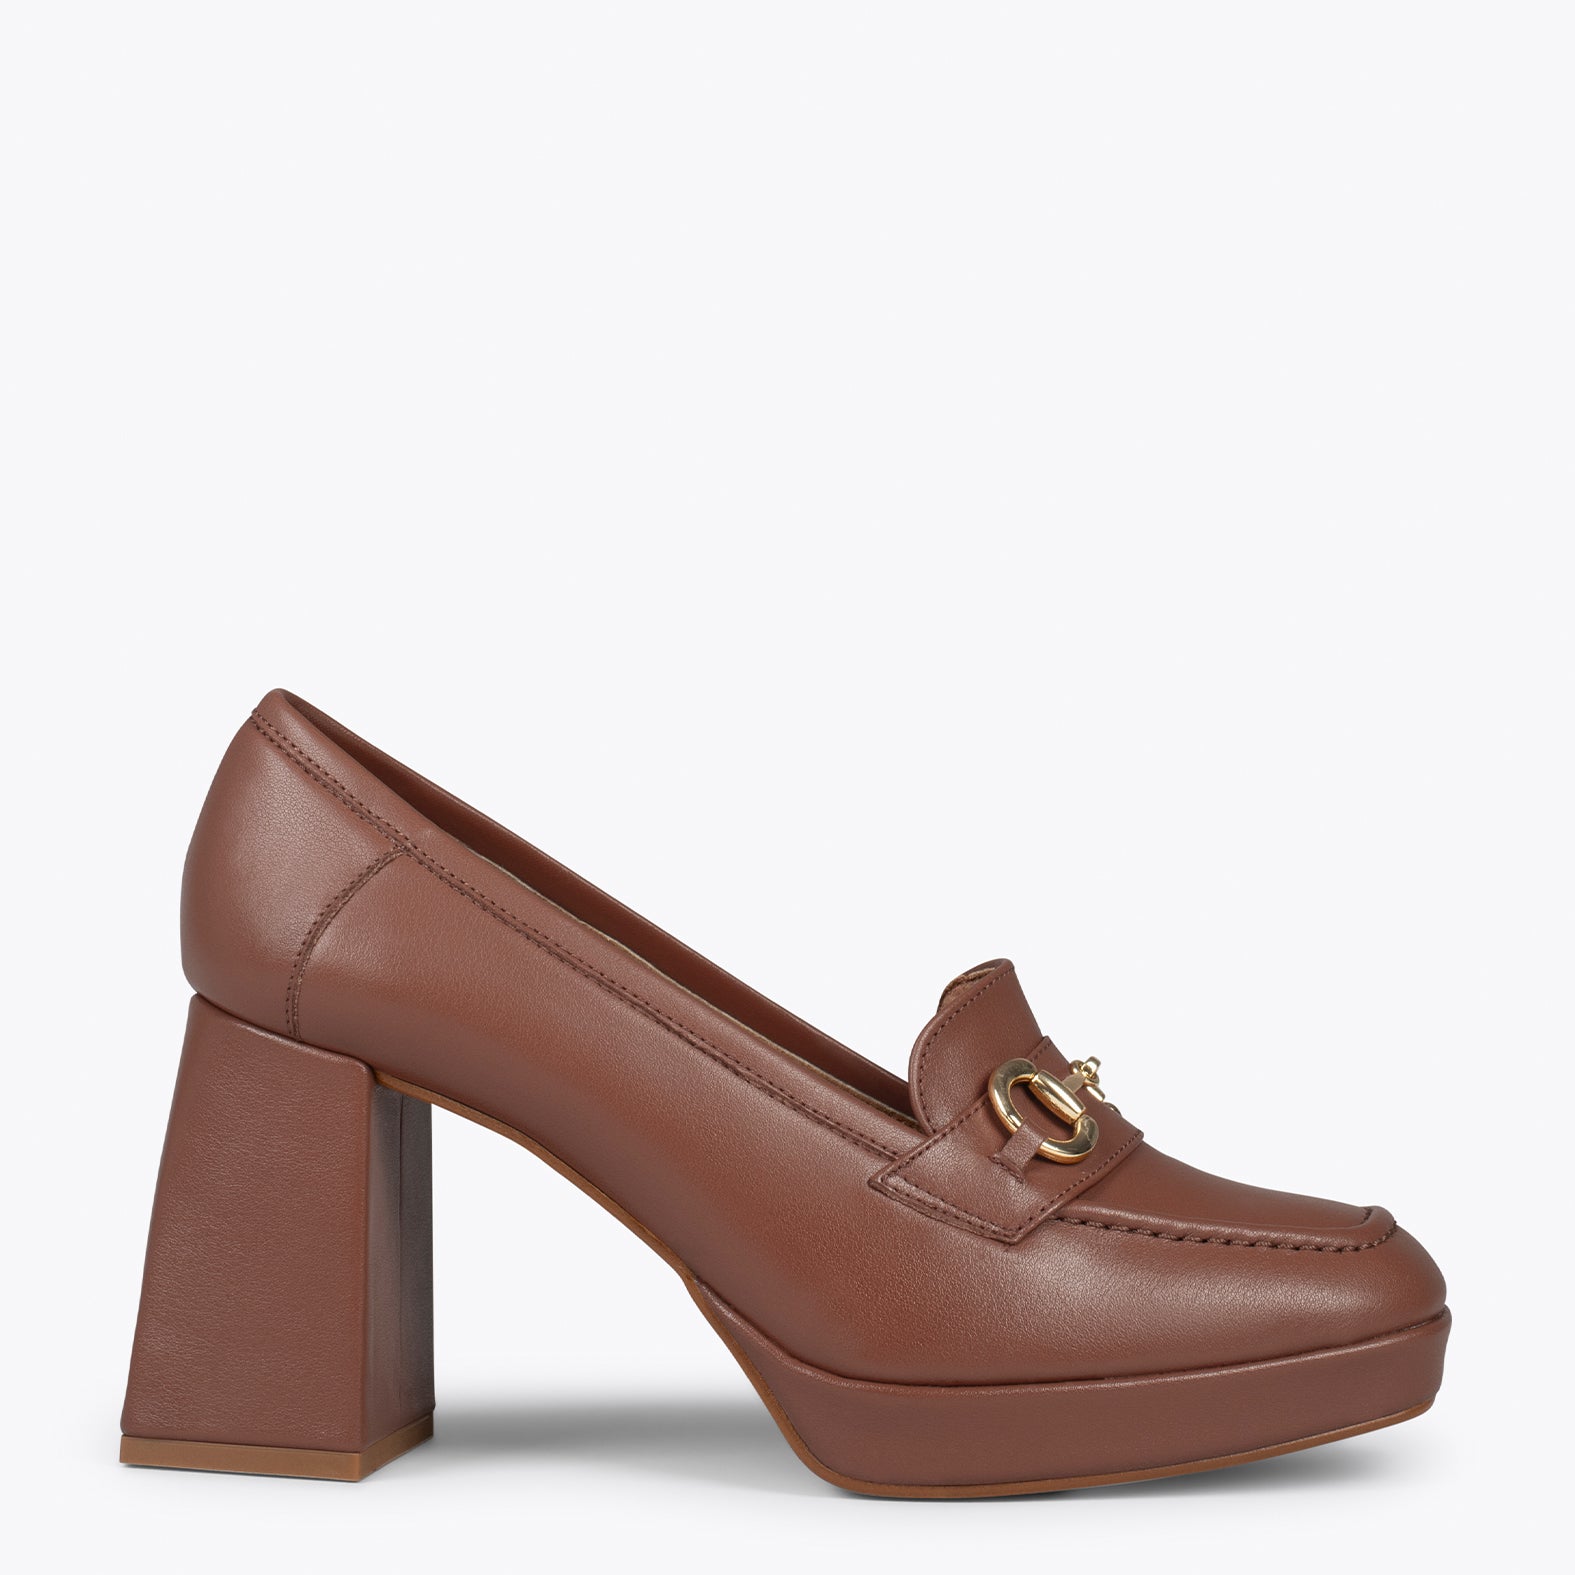 ANNETTE – BROWN moccasins with block heel and platform